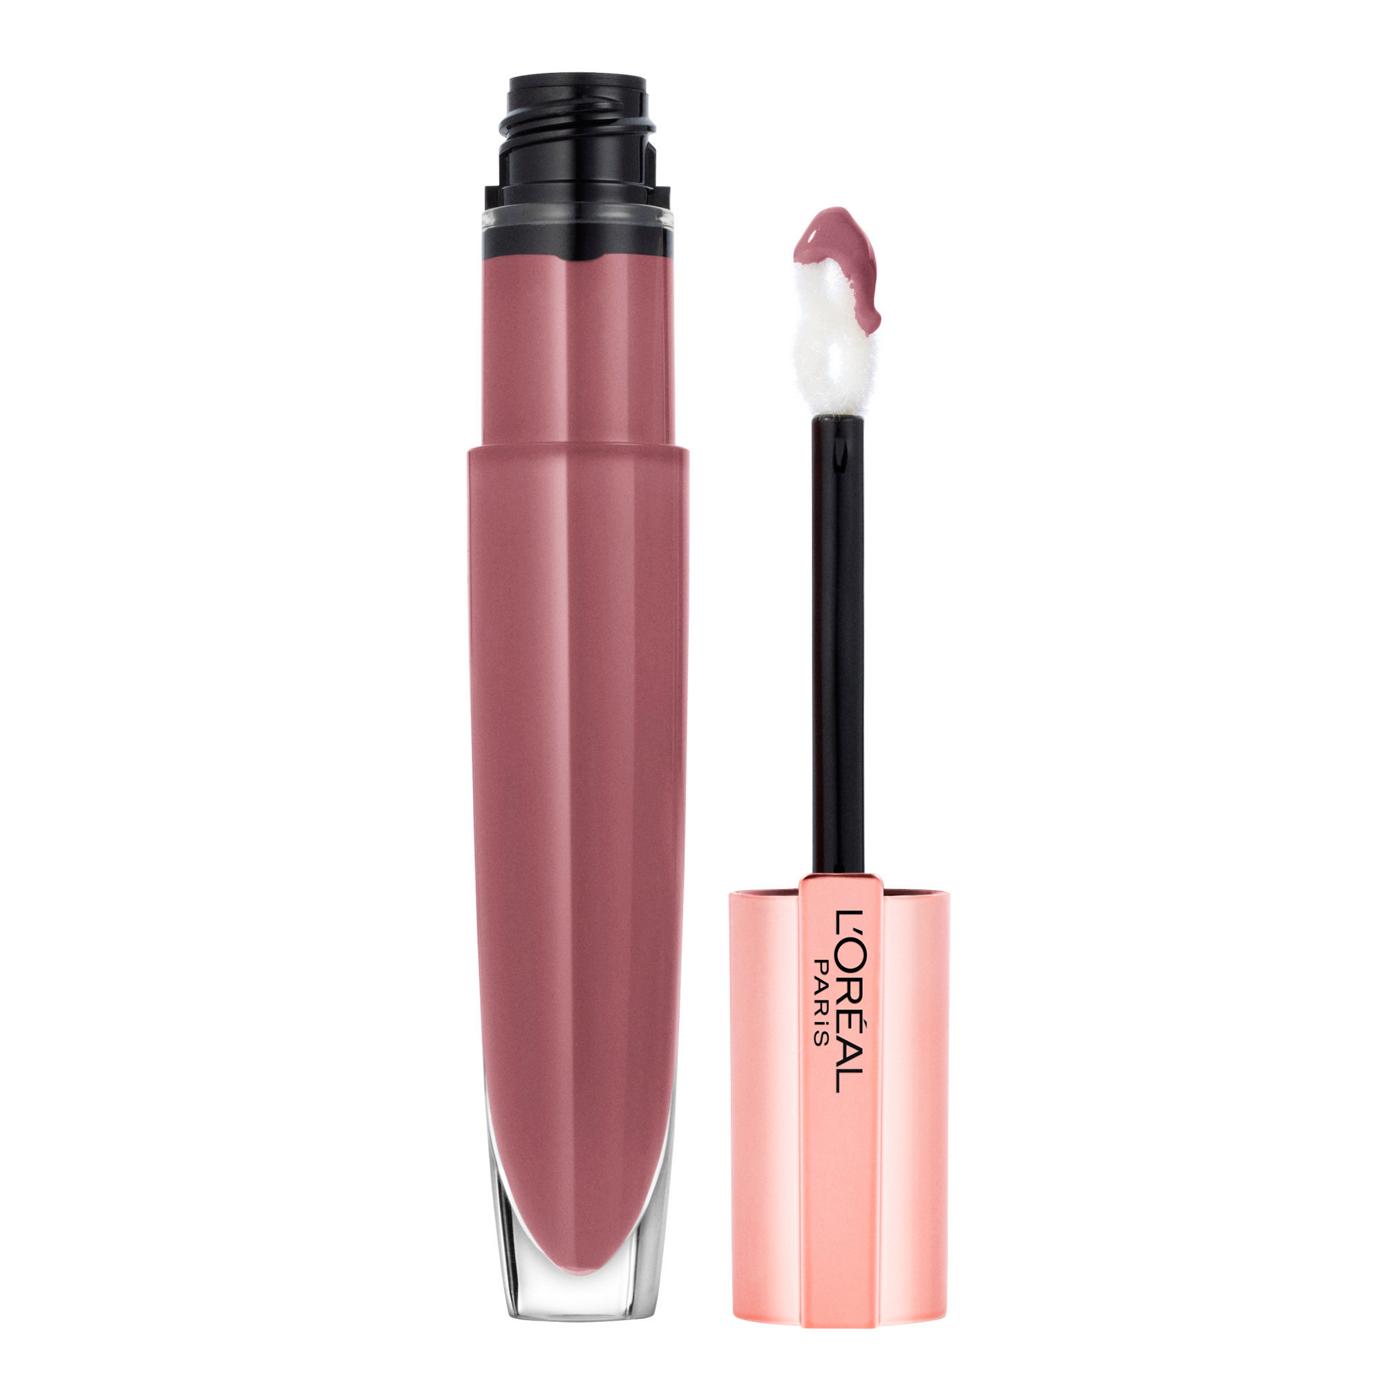 L'Oréal Paris Glow Paradise Lip Balm-in-Gloss with Pomegranate Extract Rose Harmony; image 1 of 6